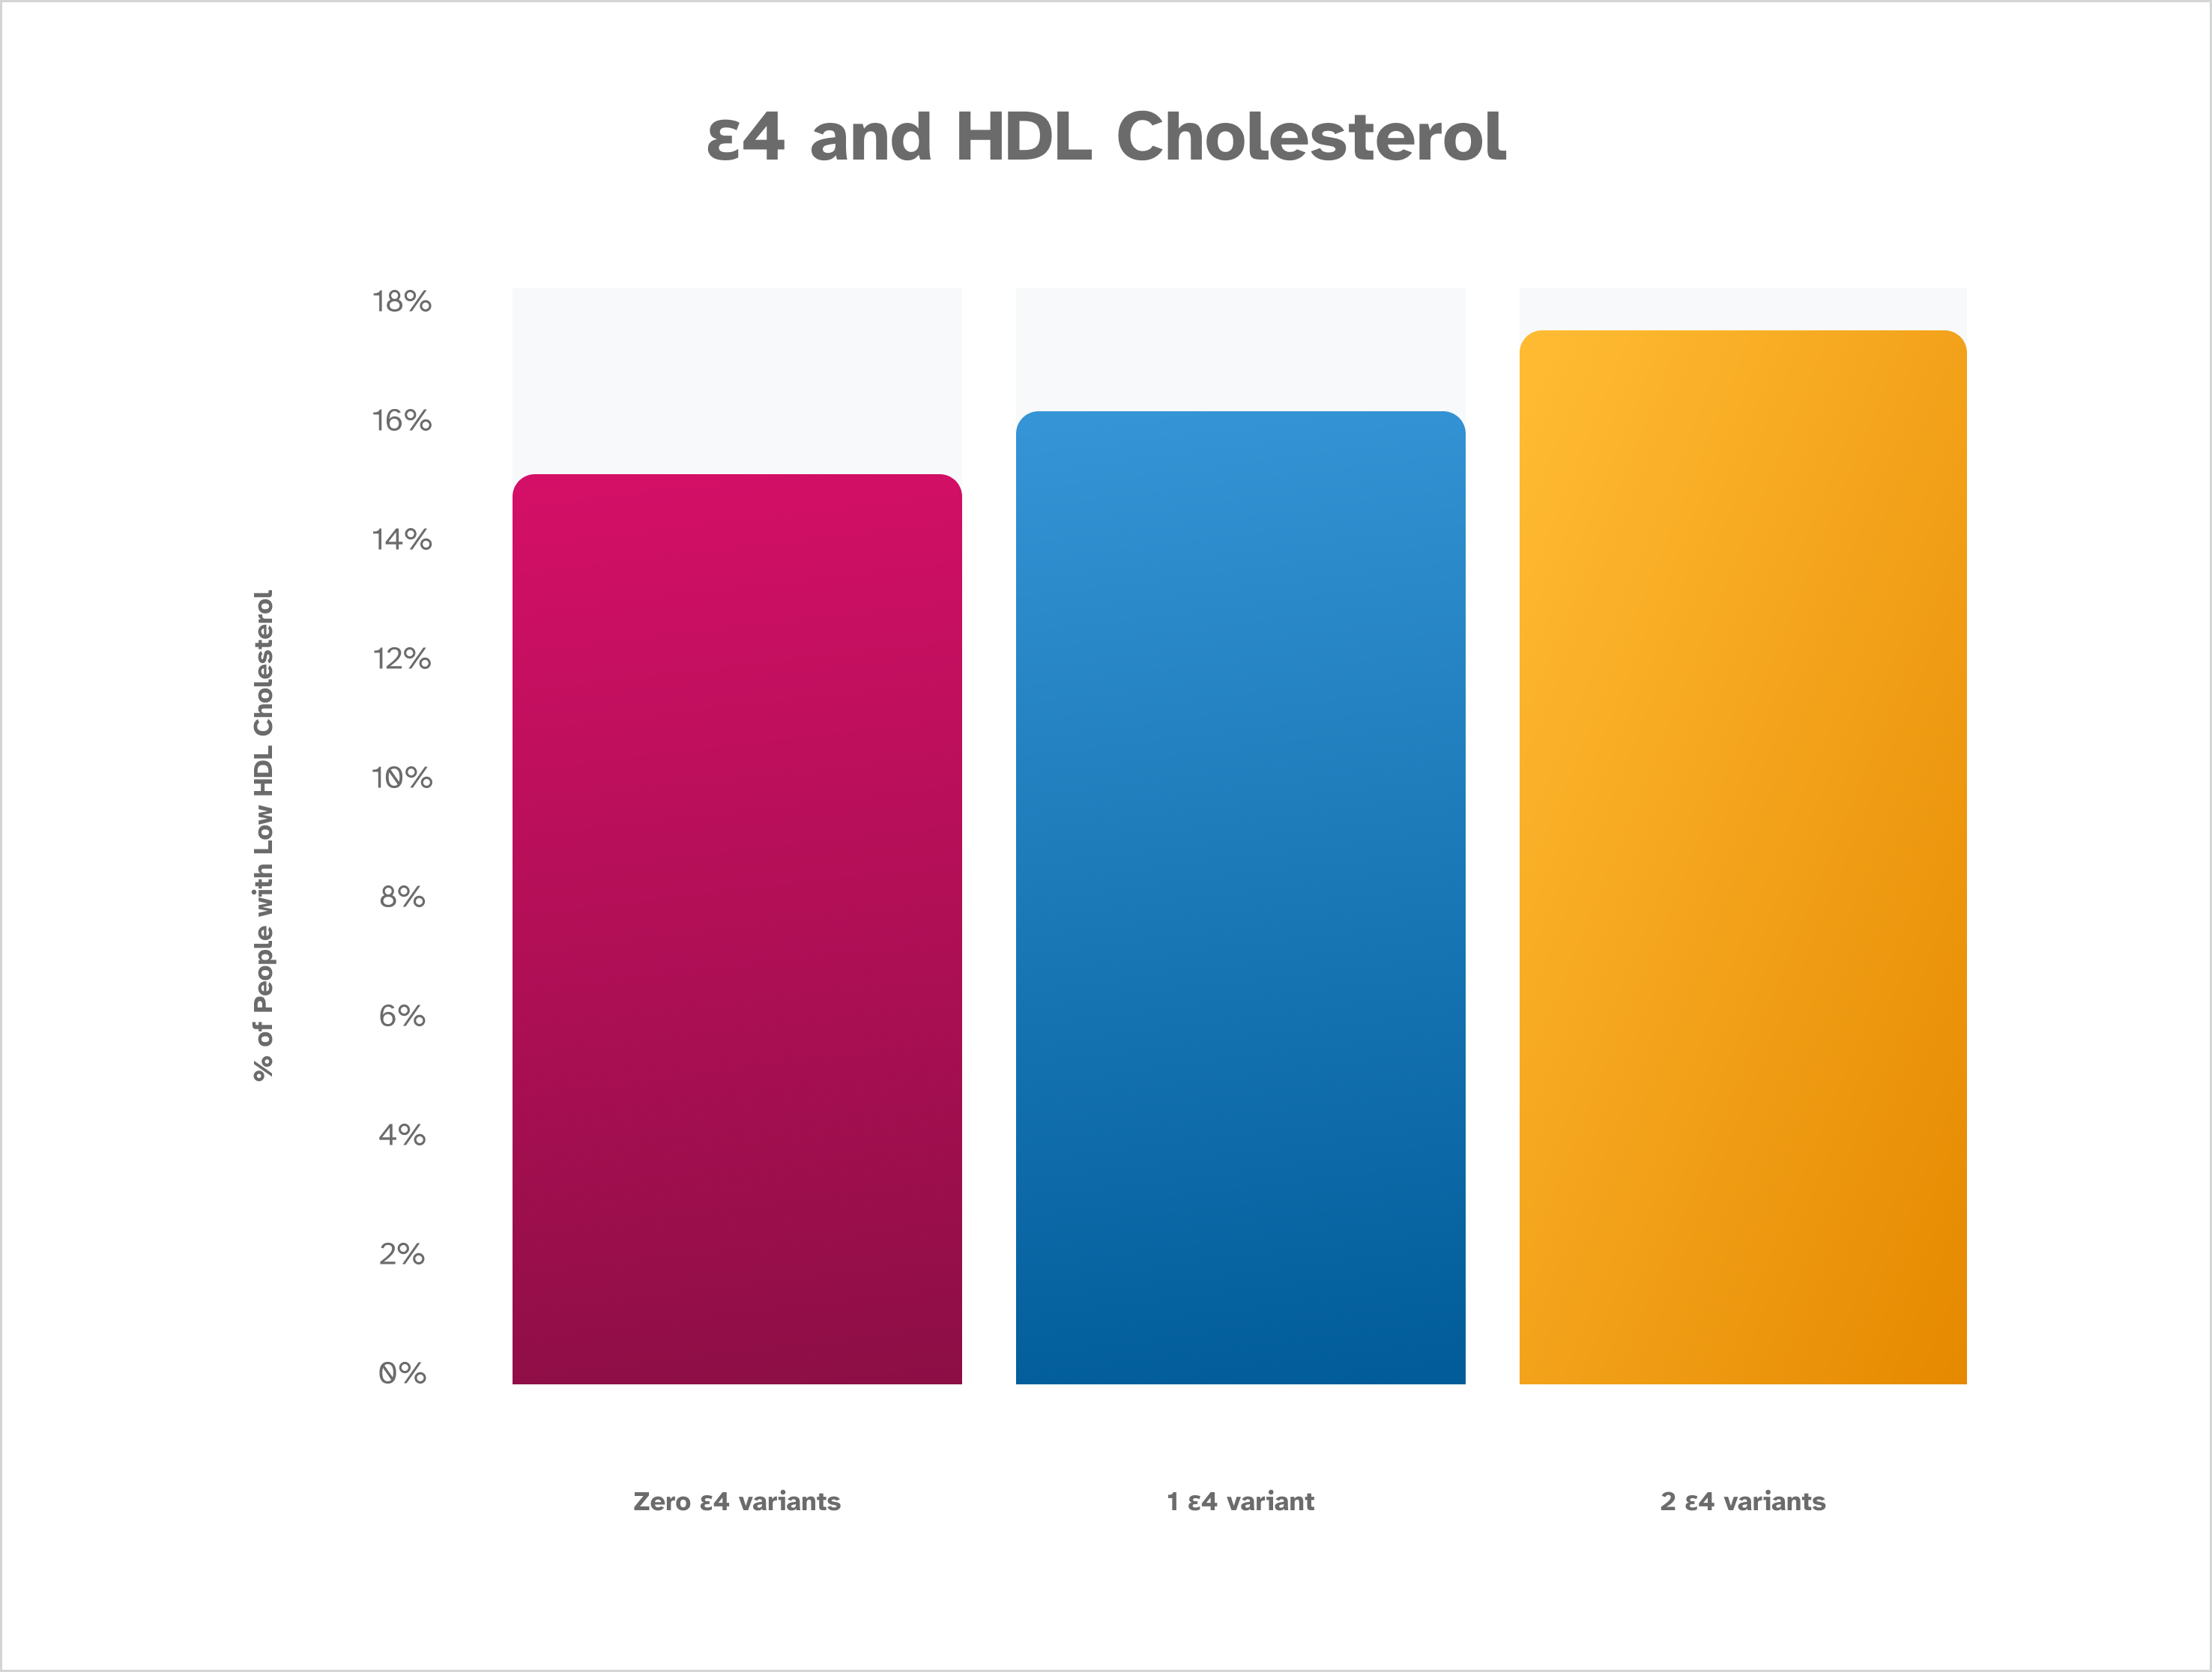 graph showing the correlation between having the e4 variant and low HDL cholesterol